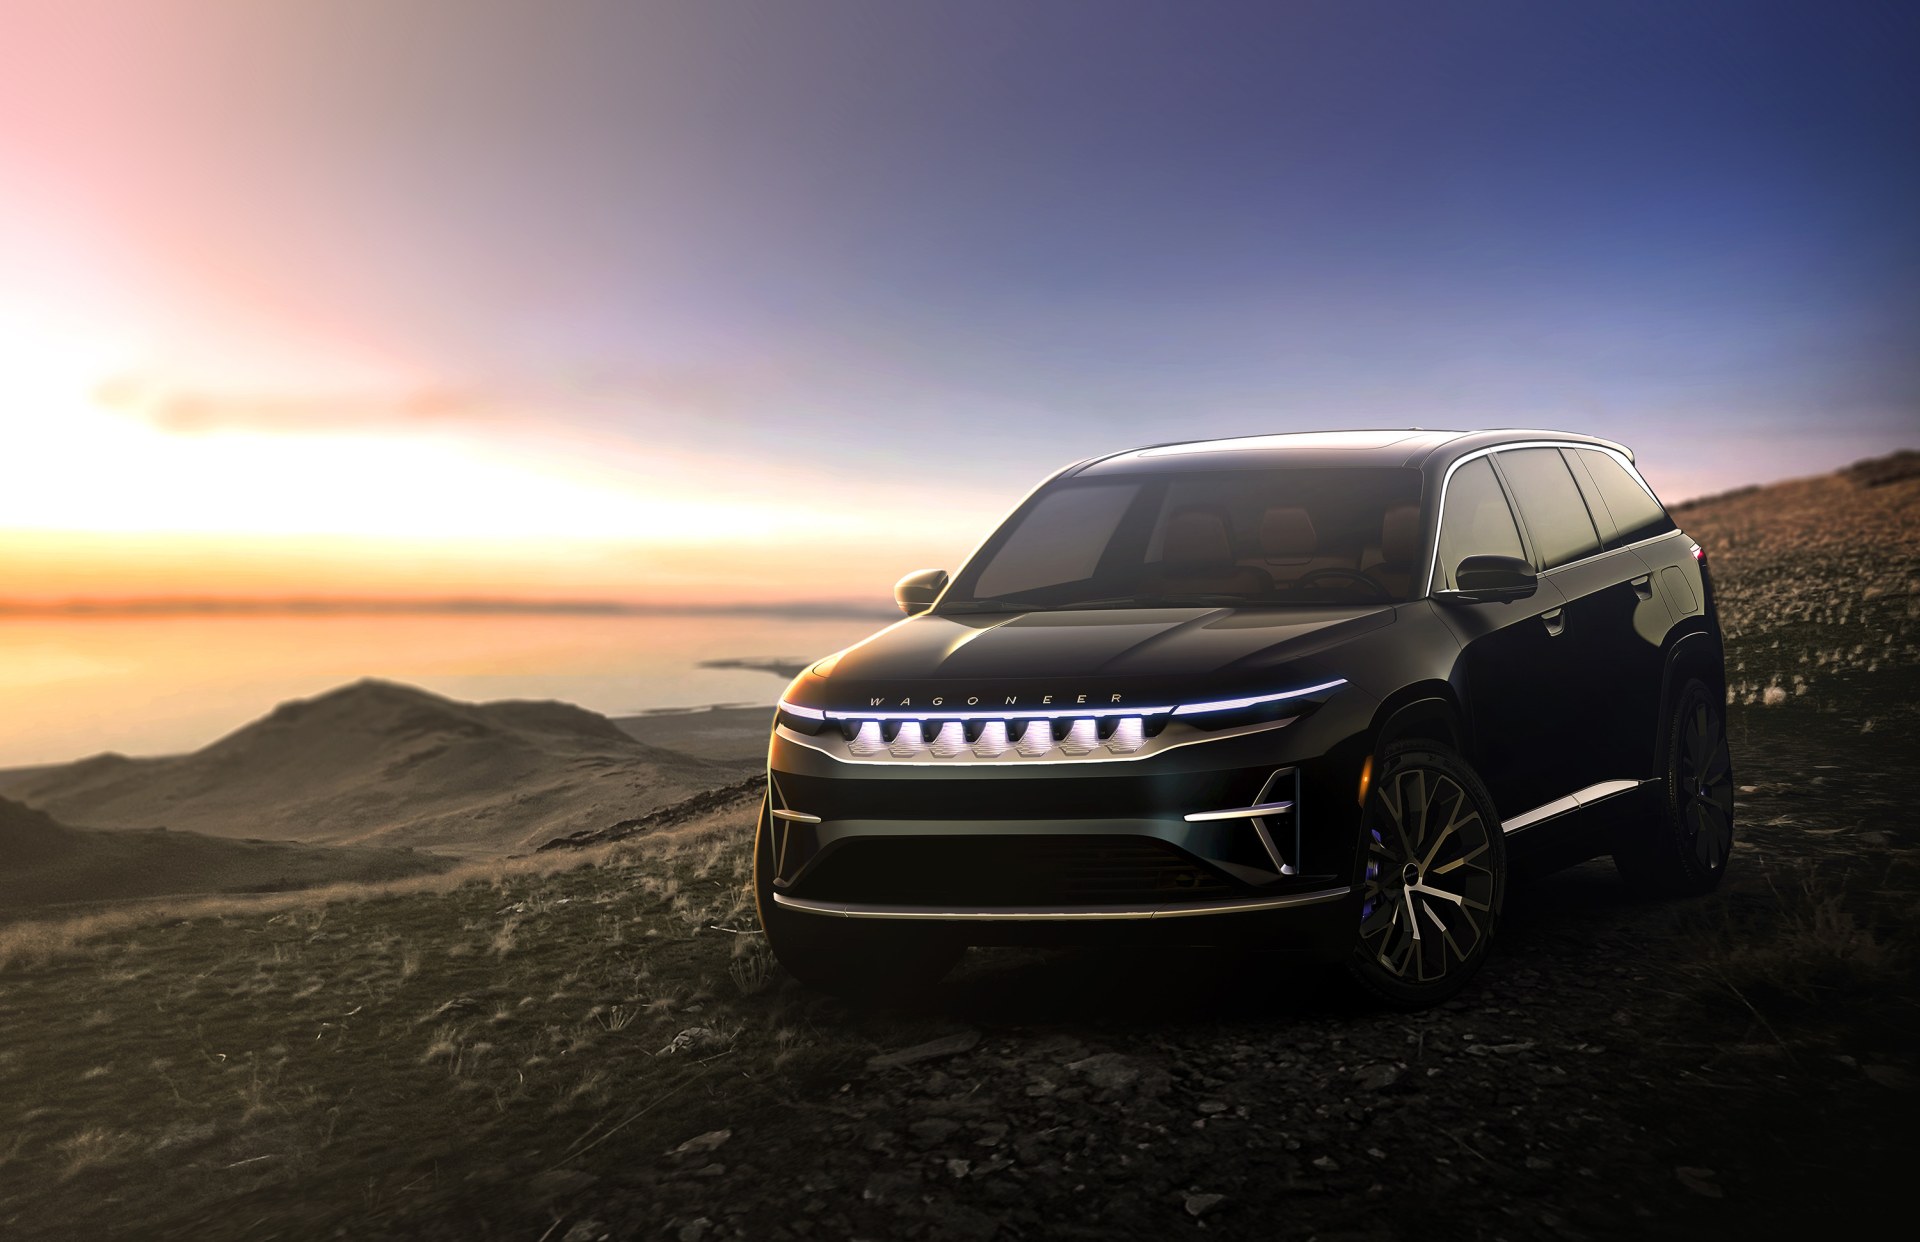 2024 Jeep Wagoneer S Officially Announced, It's a Massive EV With Big